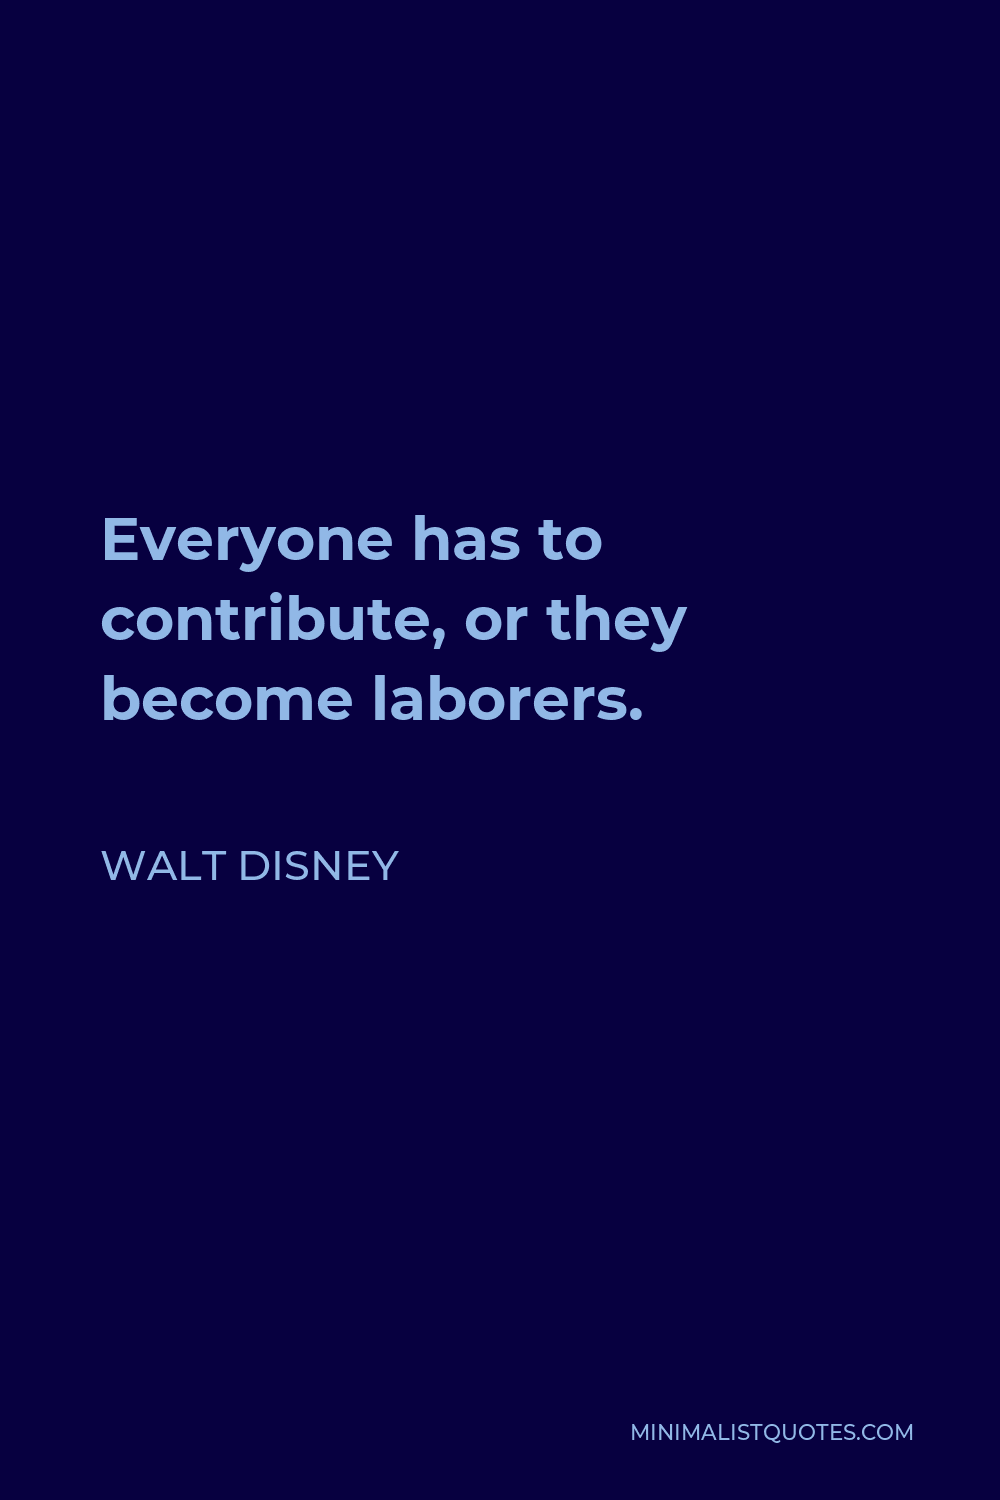 Walt Disney Quote - Everyone has to contribute, or they become laborers.